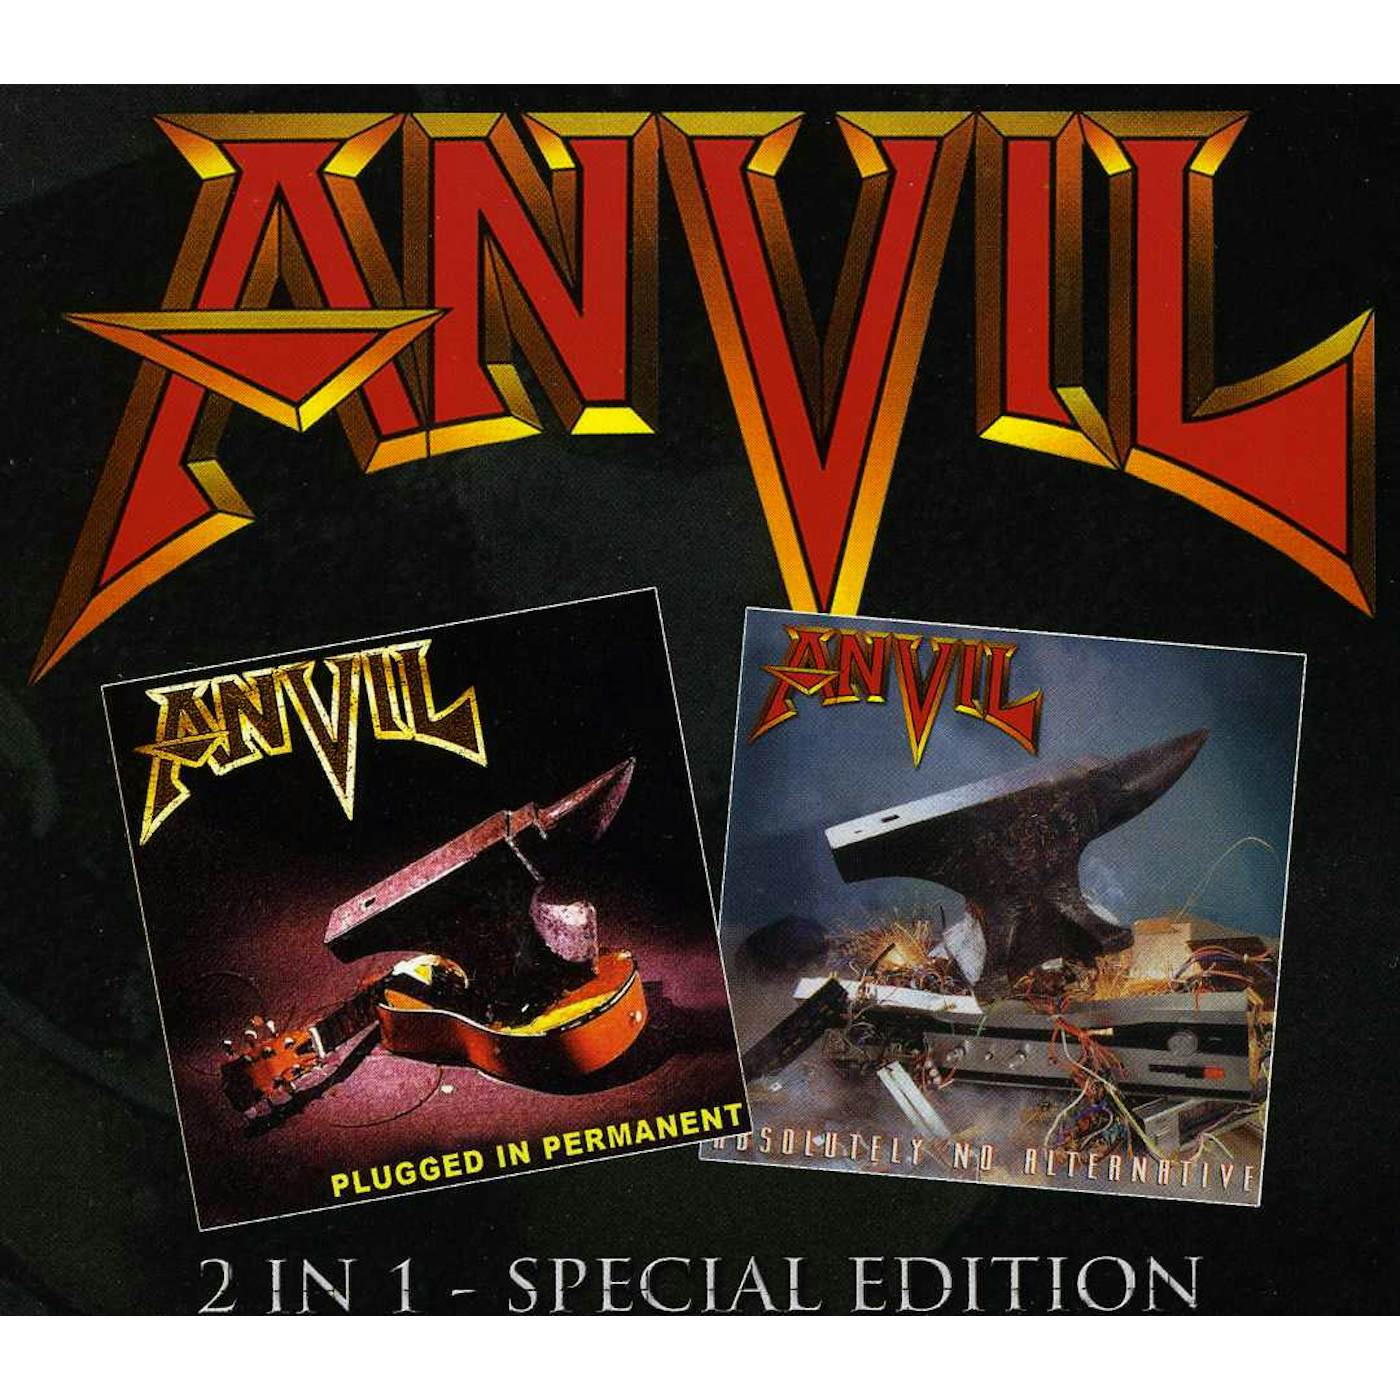 Anvil PLUGGED IN PERMANENT / ABSOLUTELY NO ALTERNATIVE CD